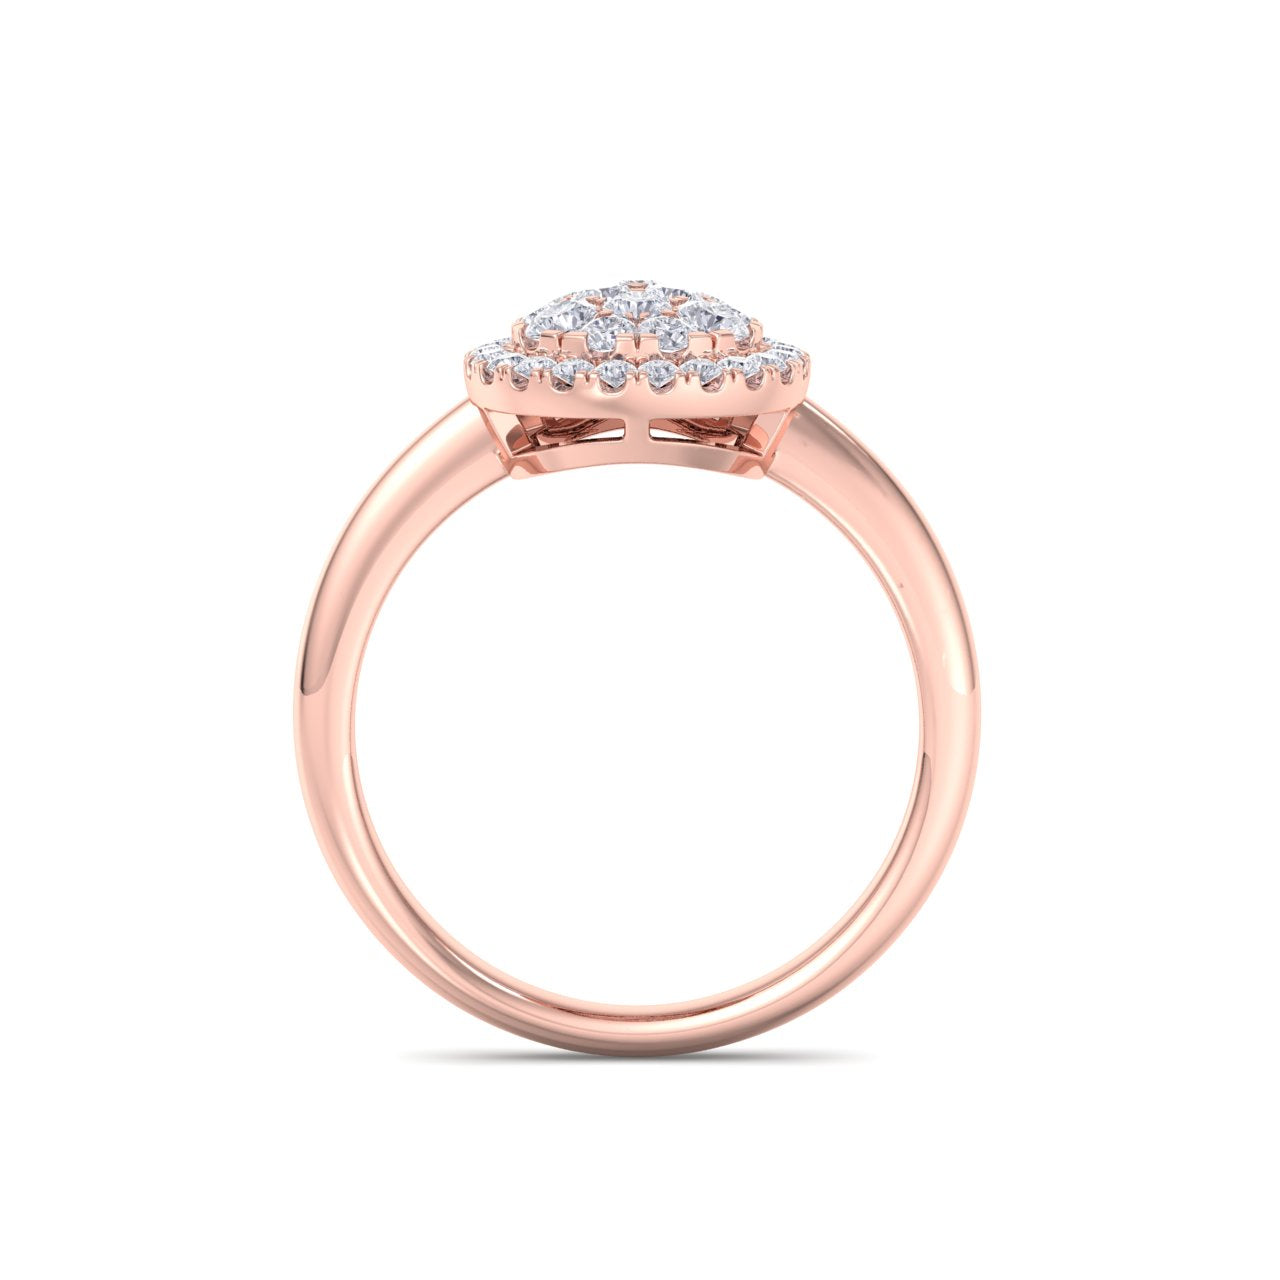 Pear shaped ring in rose gold with white diamonds of 0.54 ct in weight